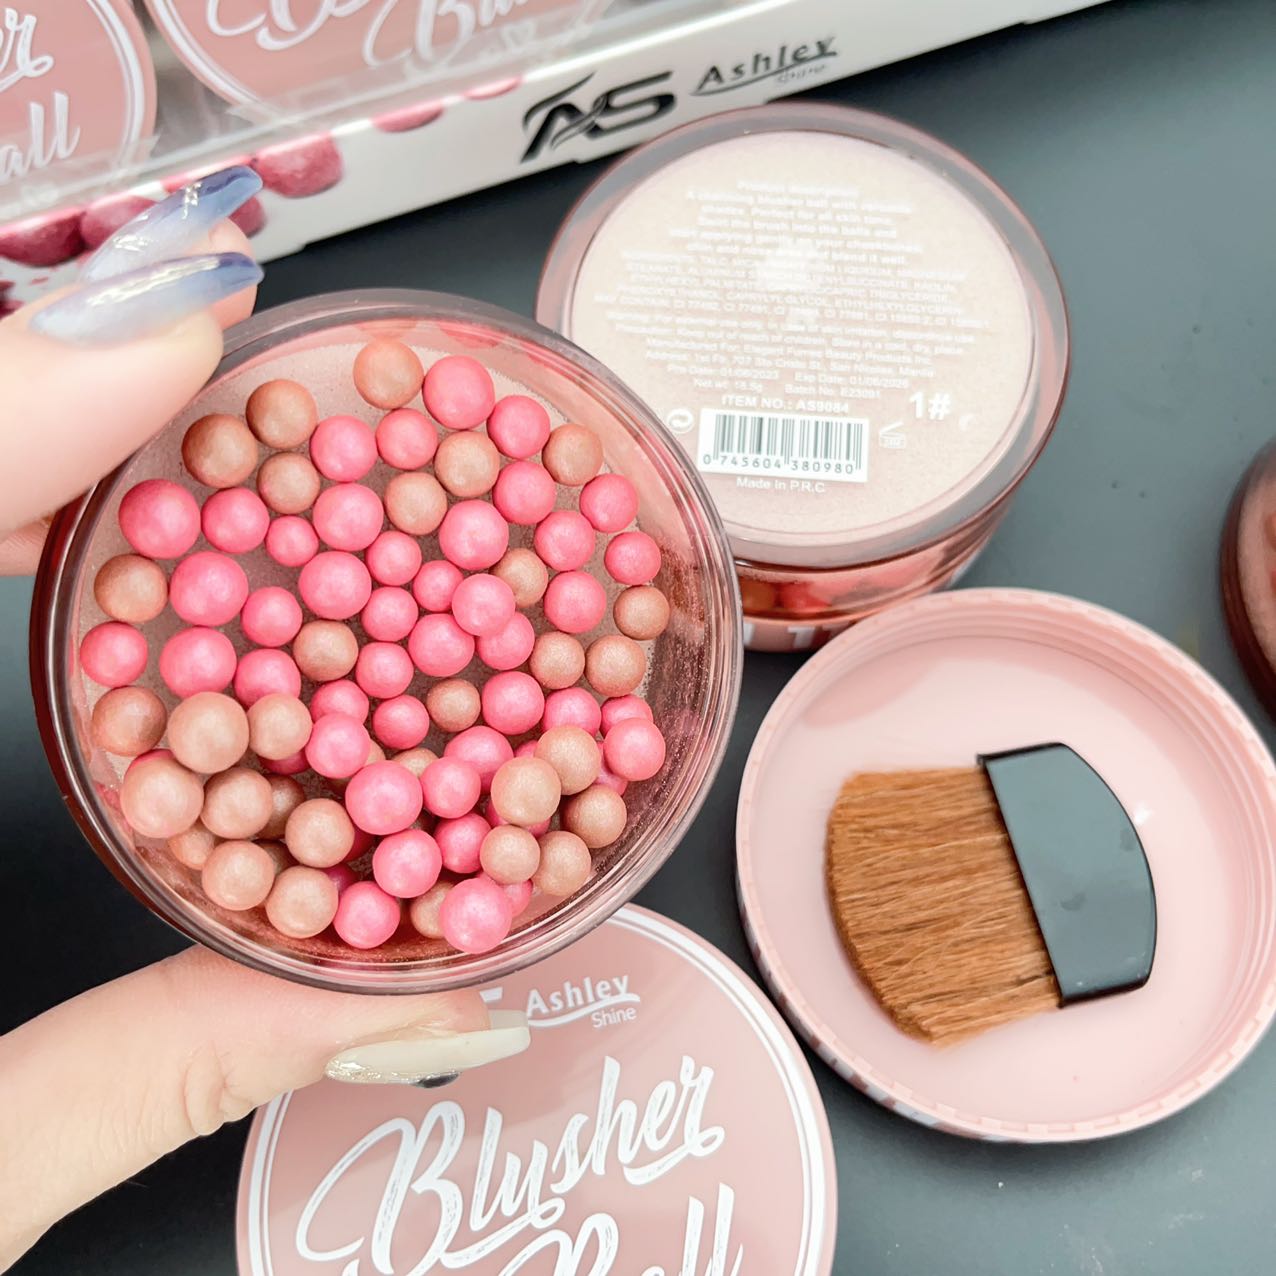 COD NEW Shine Blush On Ball Blushes Pearls Soft Powder Naturally Pigmented  Blusher with Brush